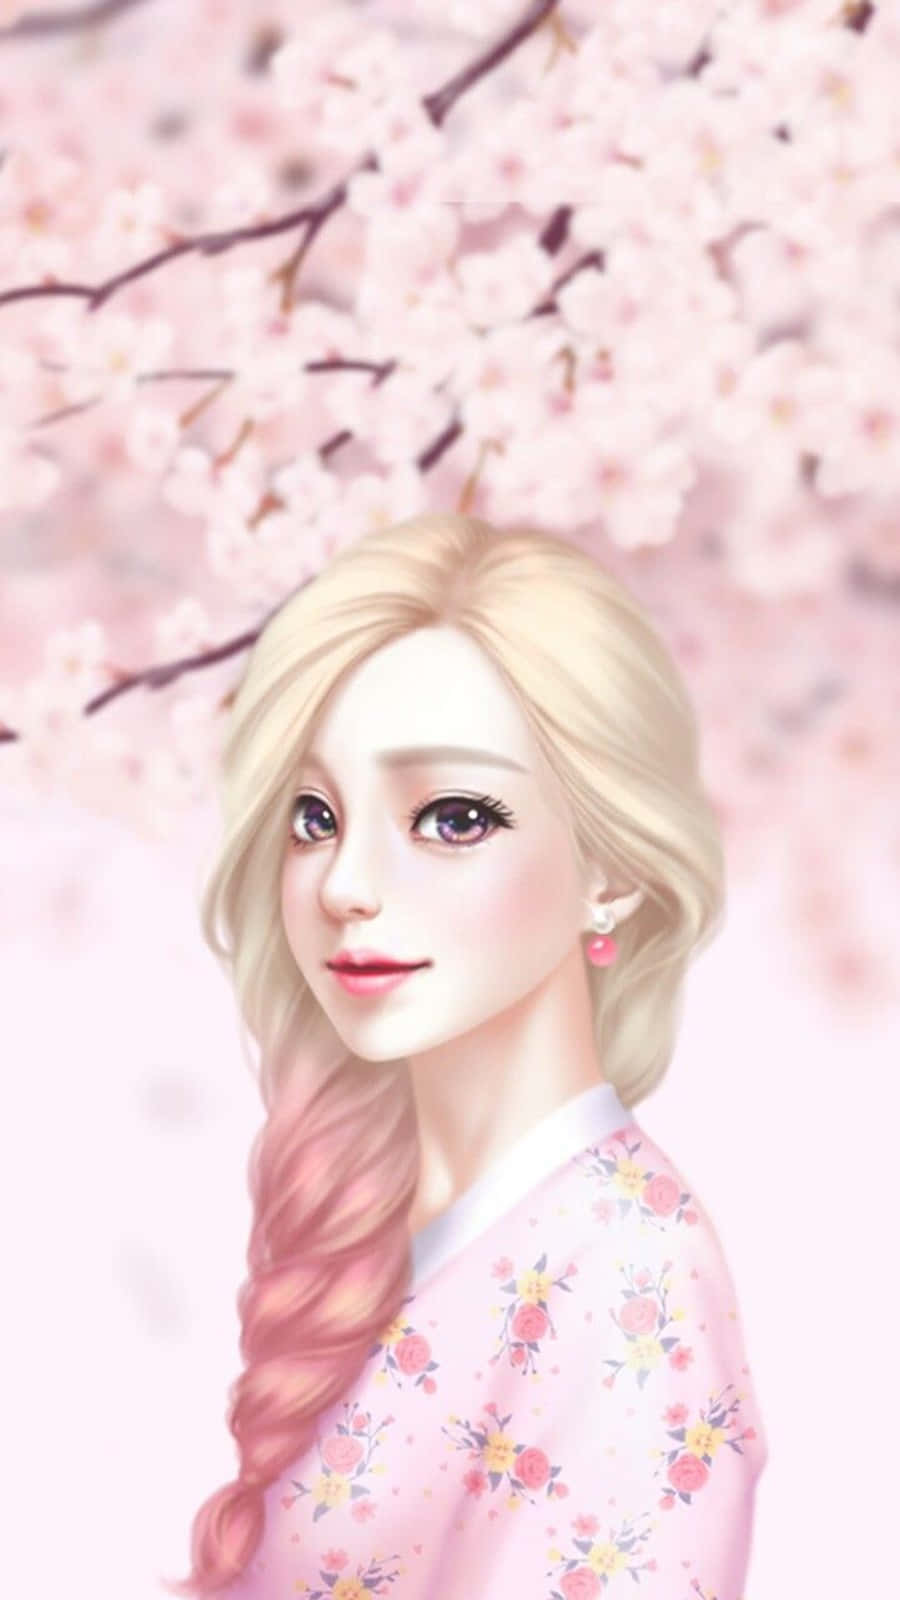 Korean Anime Girl With Pink Ombre Hair